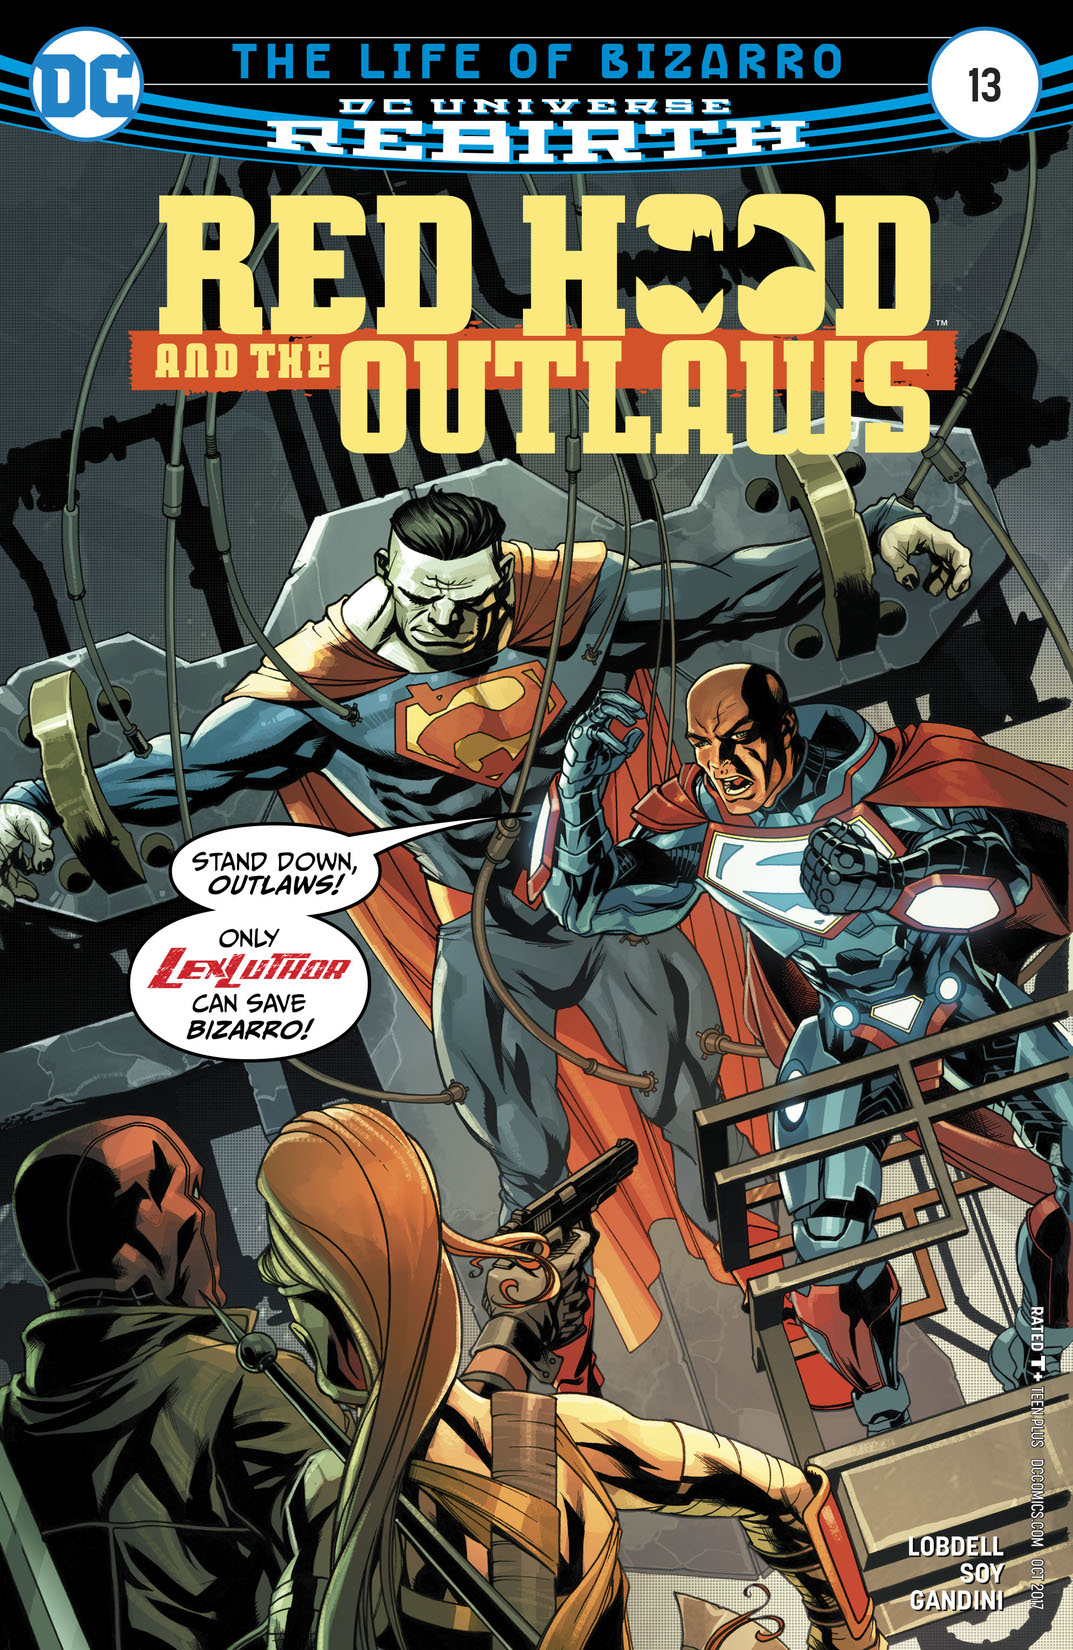 Red Hood and the Outlaws (2016-) #13 preview images